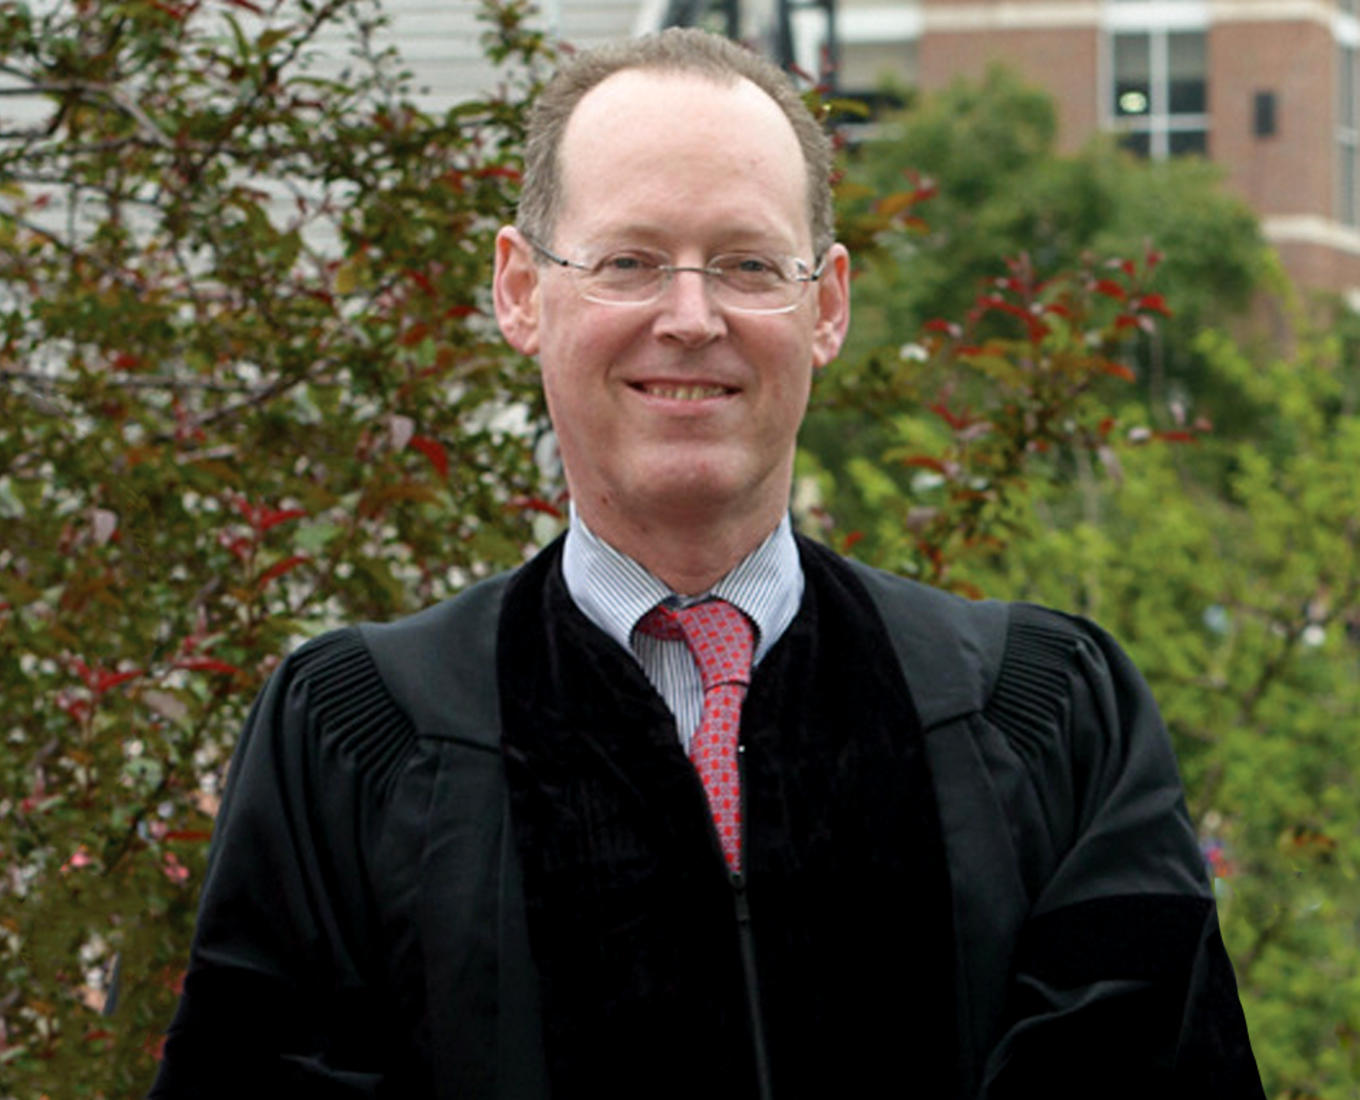 Dr. Paul Farmer was an honorary degree recipient and commencement speaker at Holy Cross in 2012.